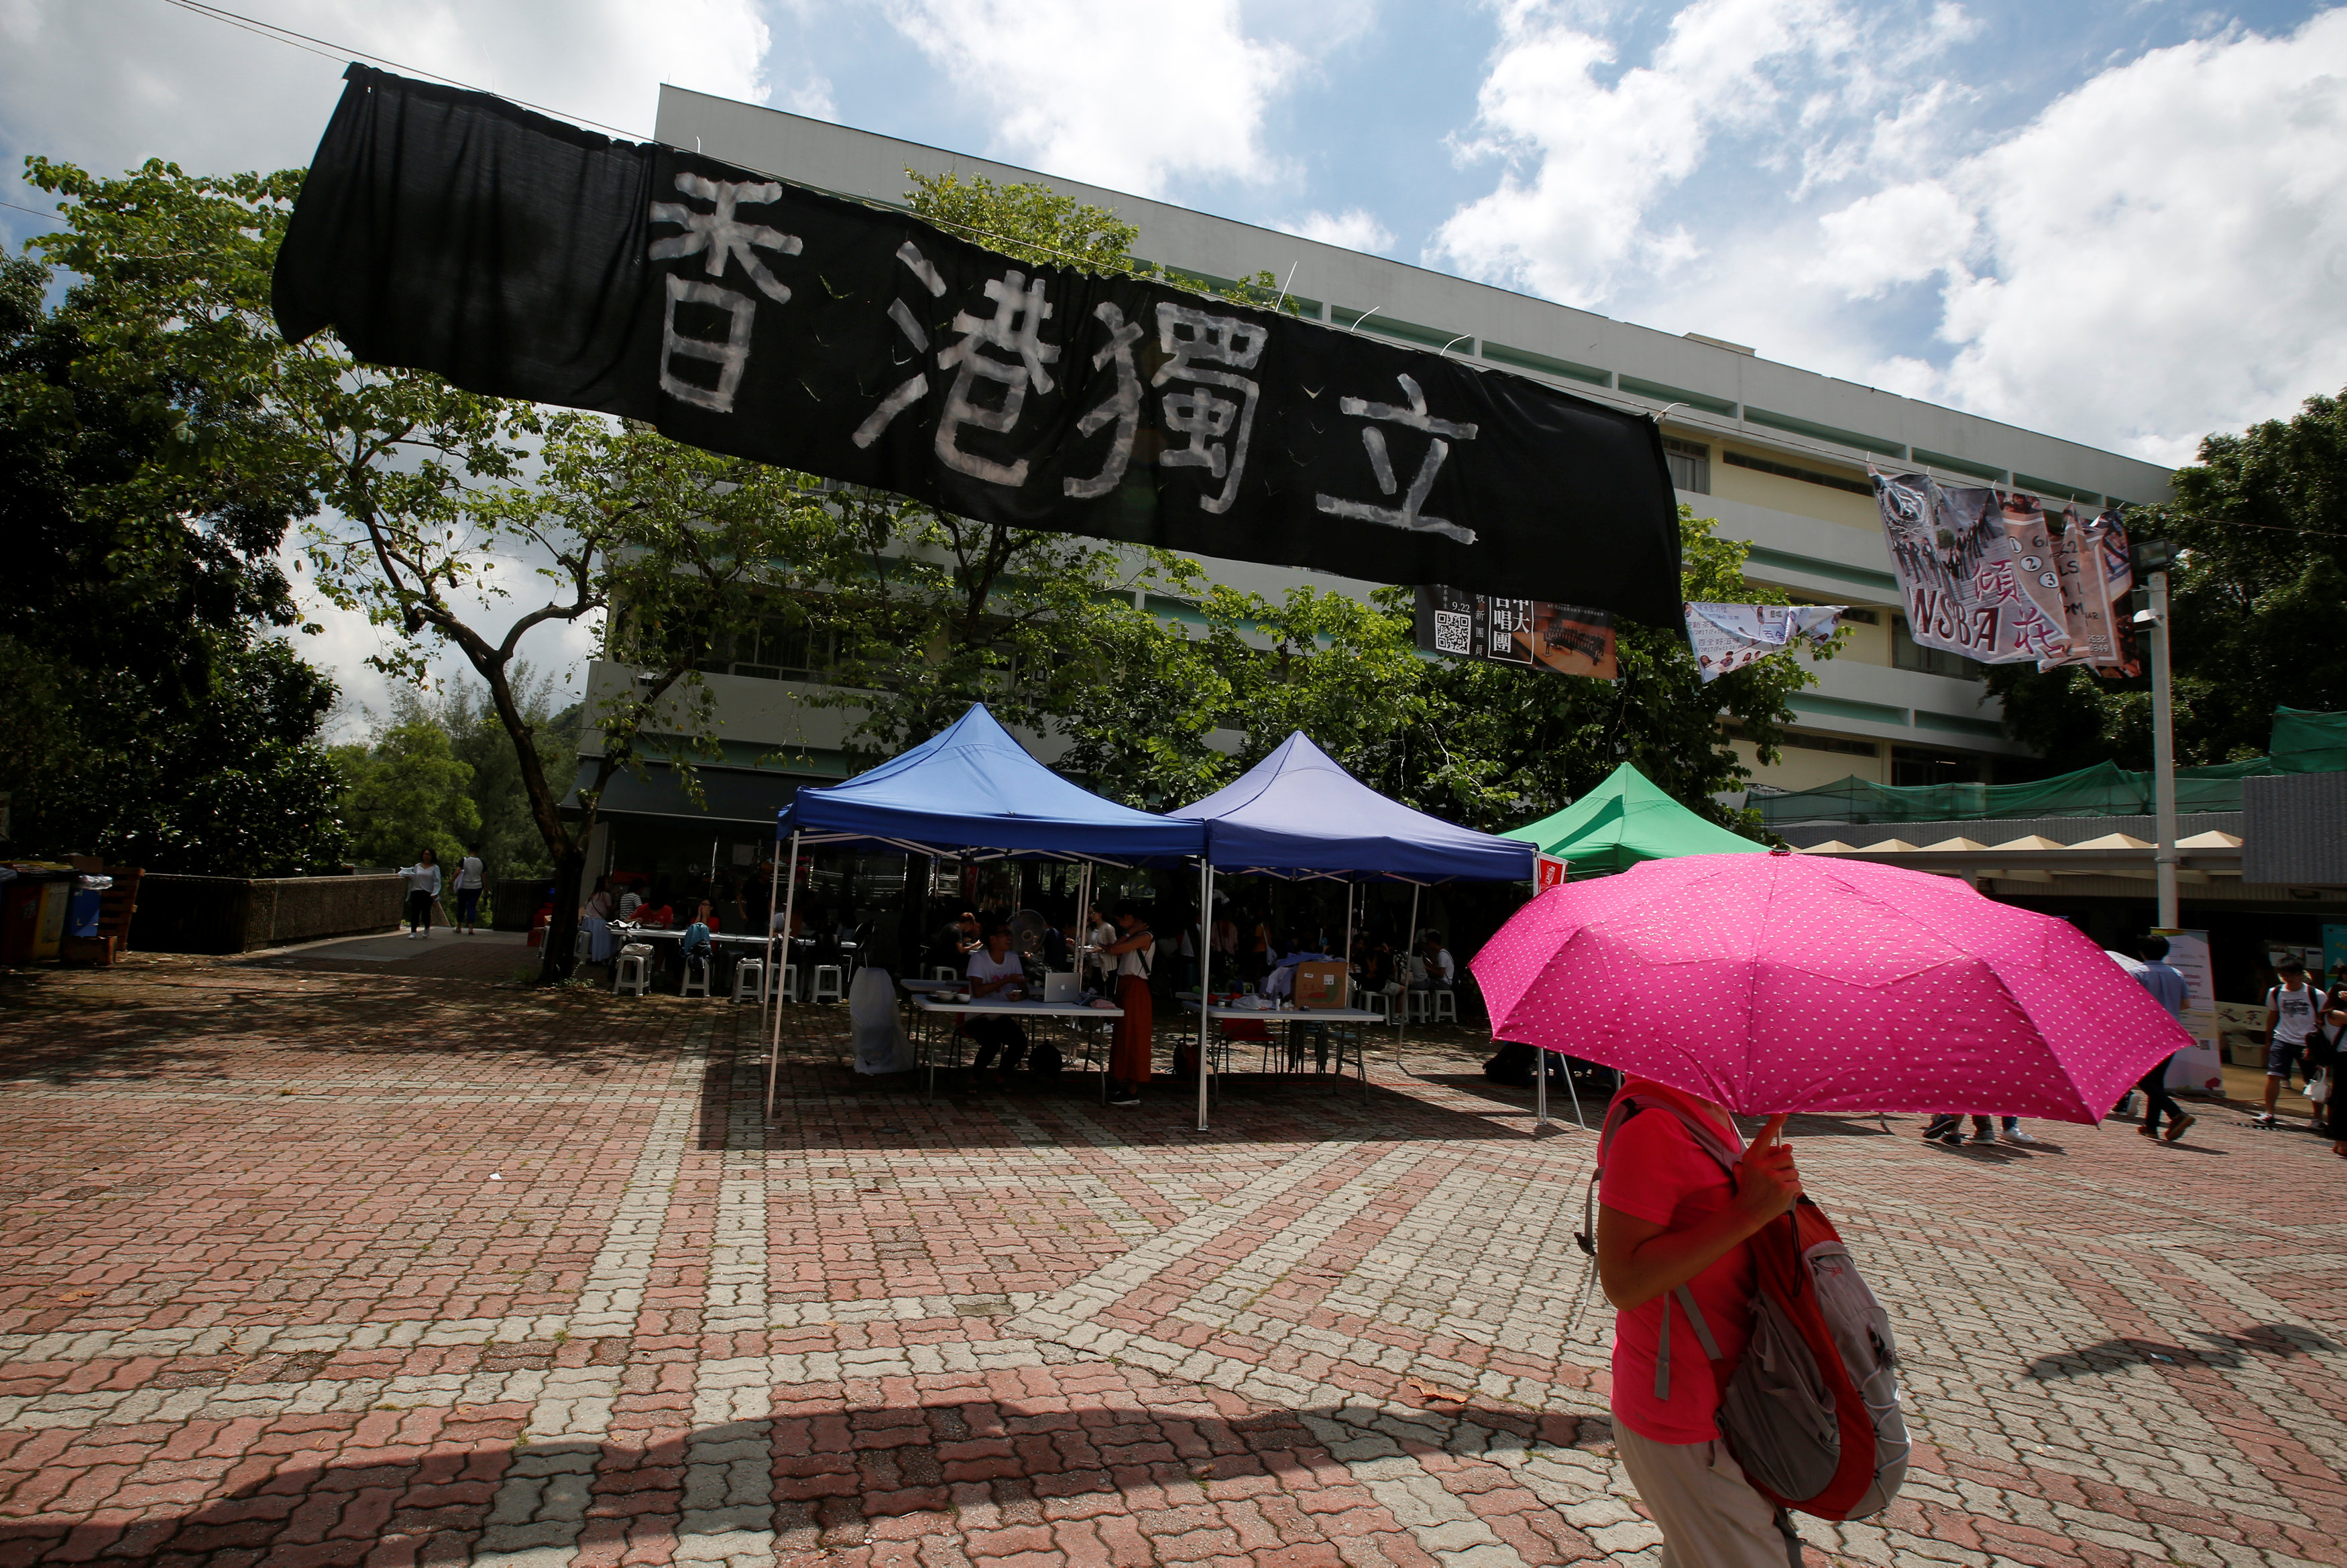 Pro-independence from China posters appearing on Hong Kong campuses stoke new tension